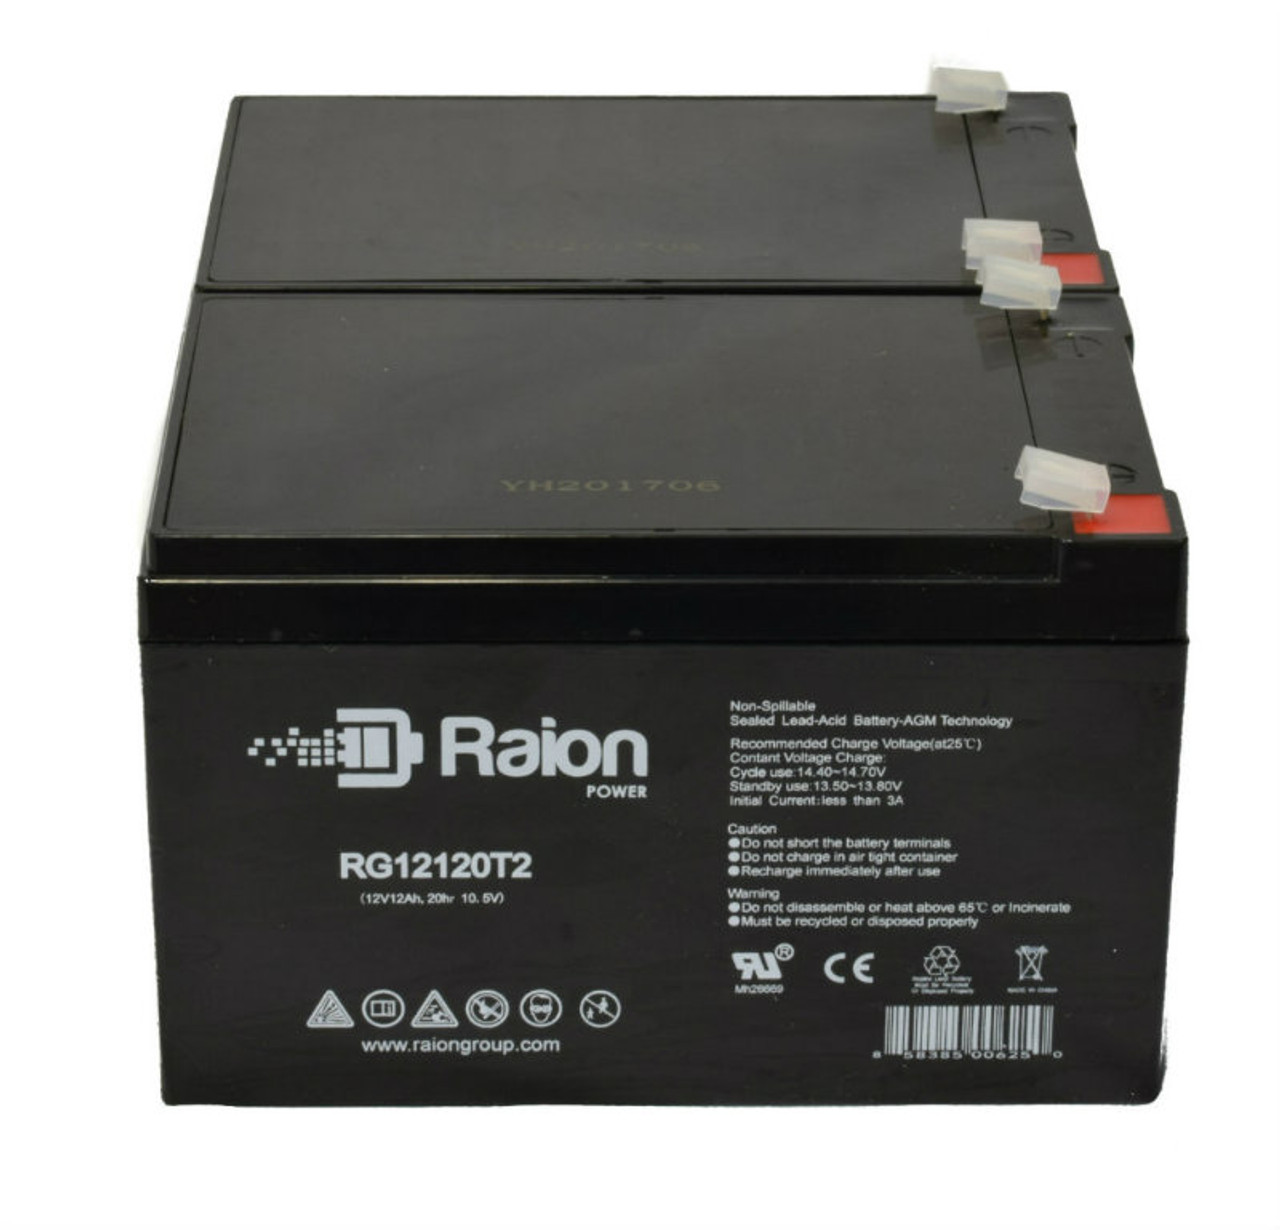 Raion Power 12V 12Ah Non-Spillable Compatible Replacement Battery for Power Kingdom PS12D-12 - (2 Pack)